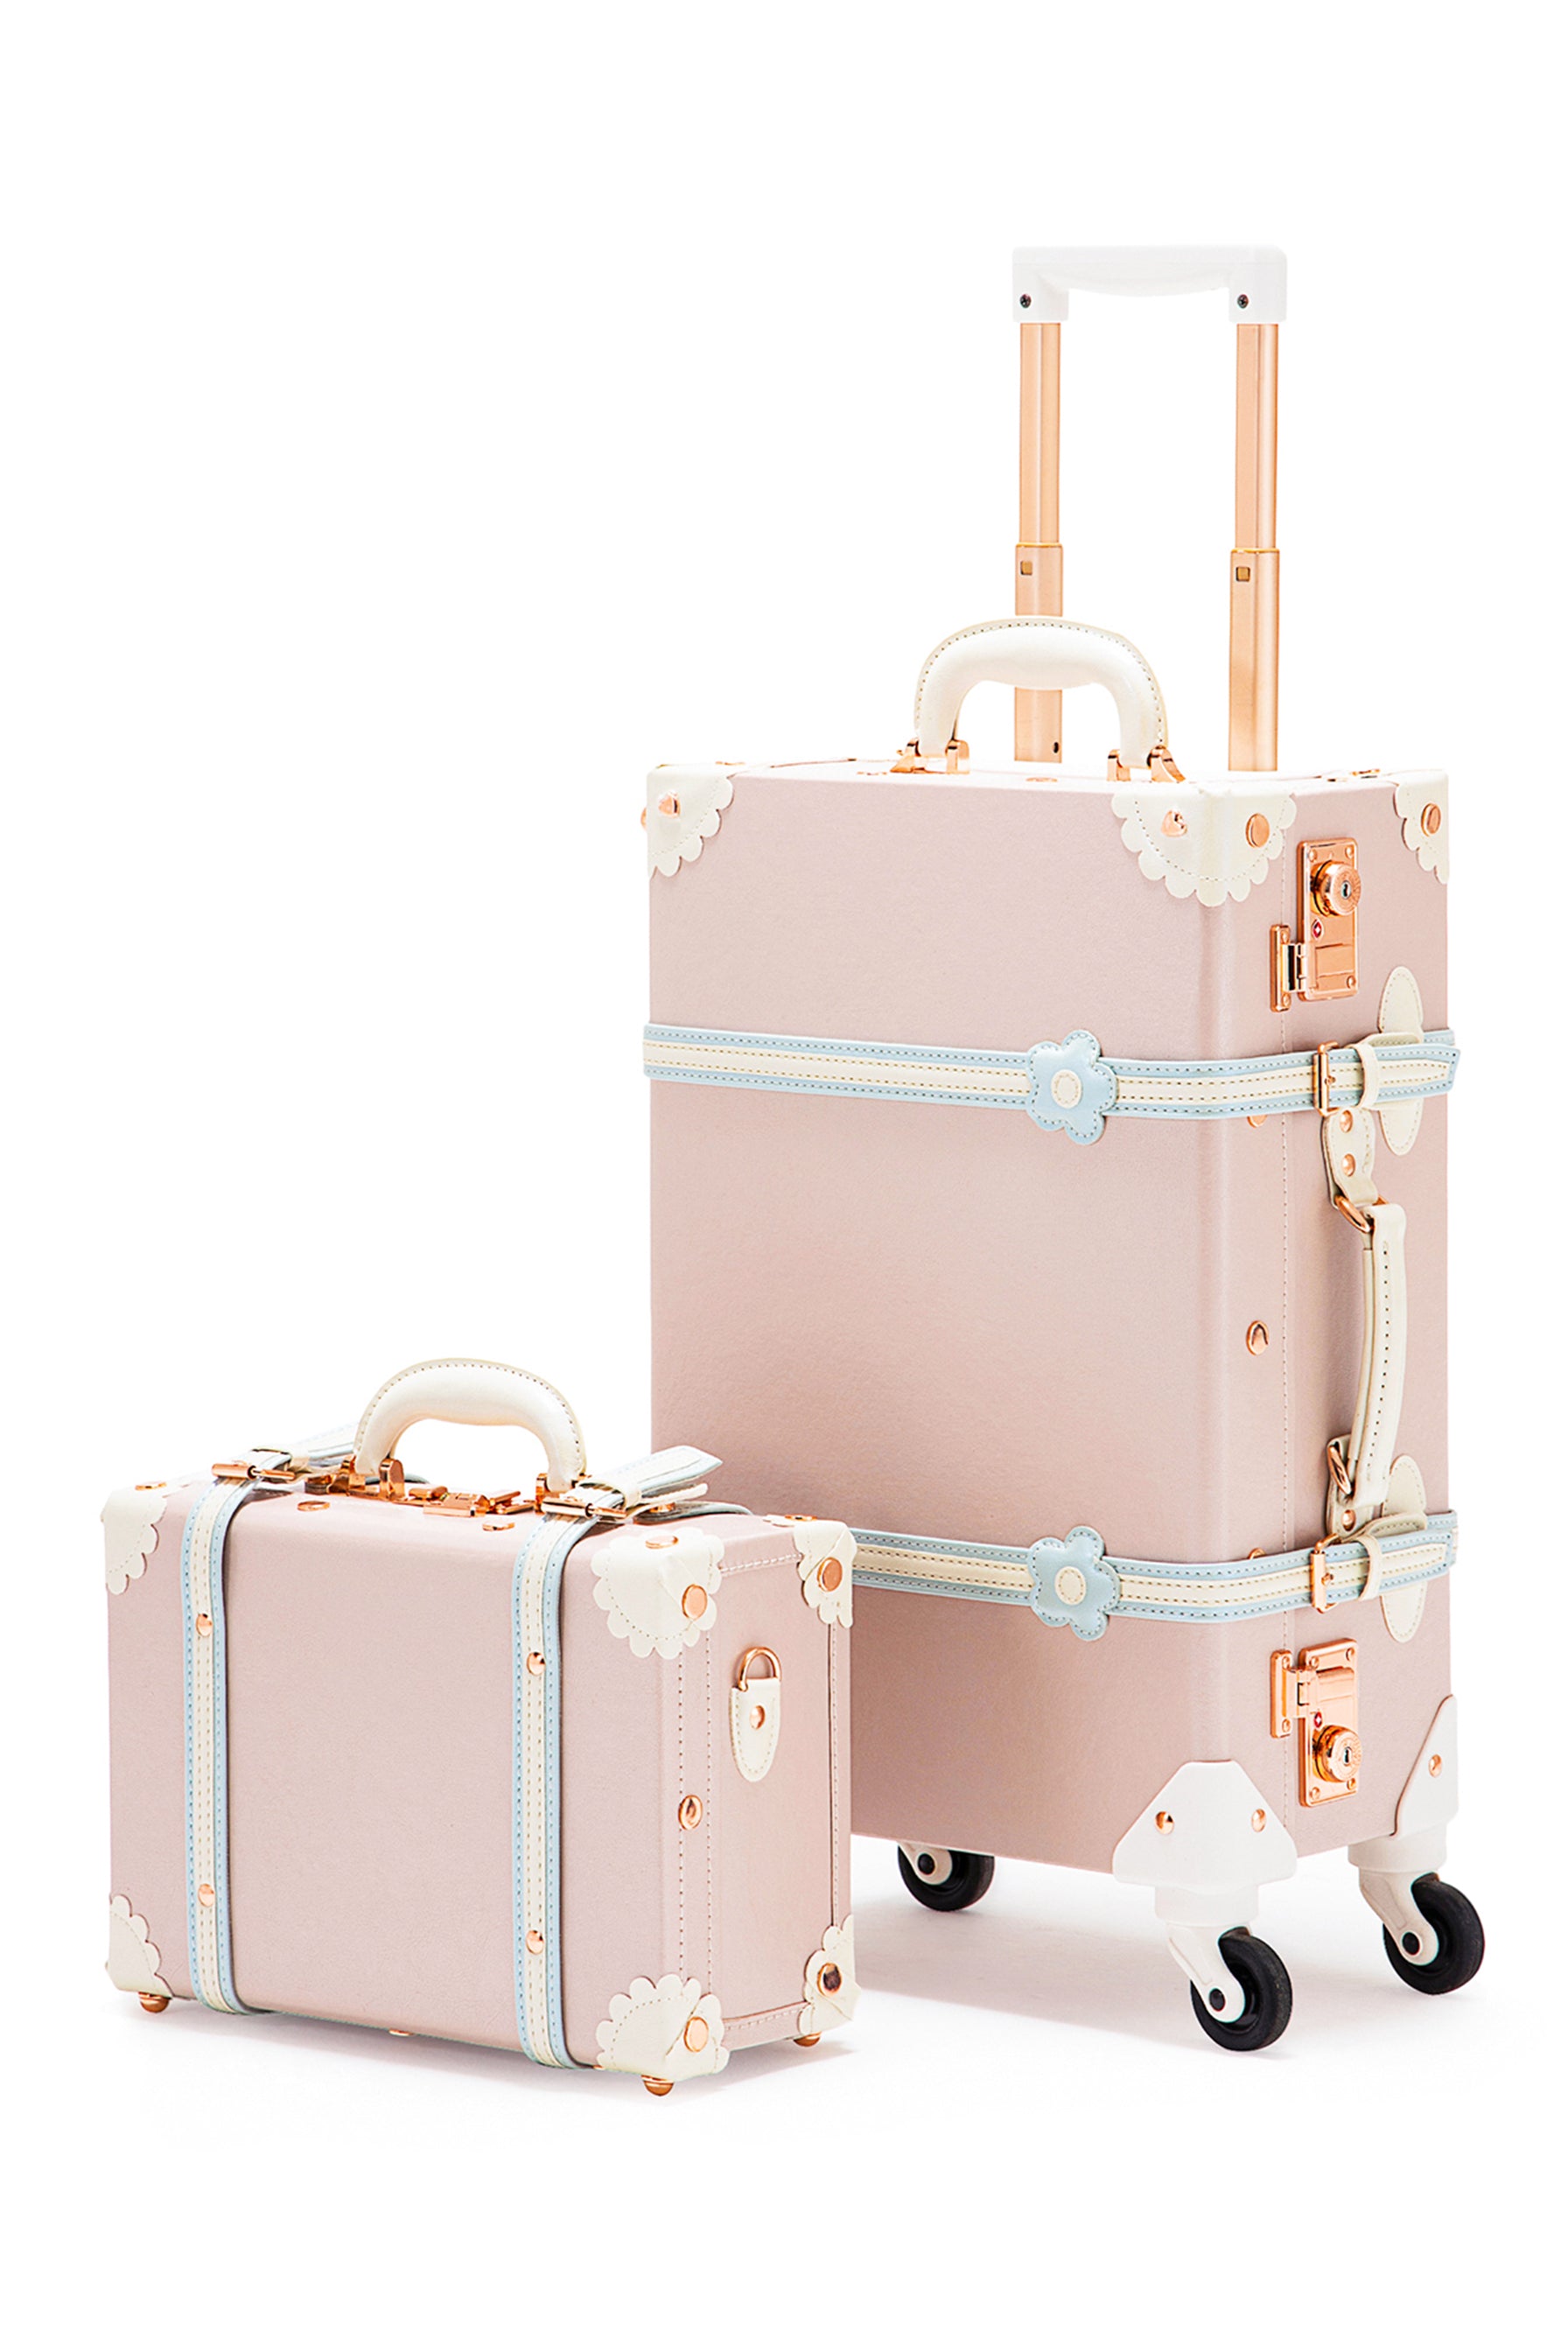 COTRUNKAGE Vintage Checked Luggage Sets 2 Piece TSA Lock Suitcase for Women  with 16 Suitcase Case, Pearl White